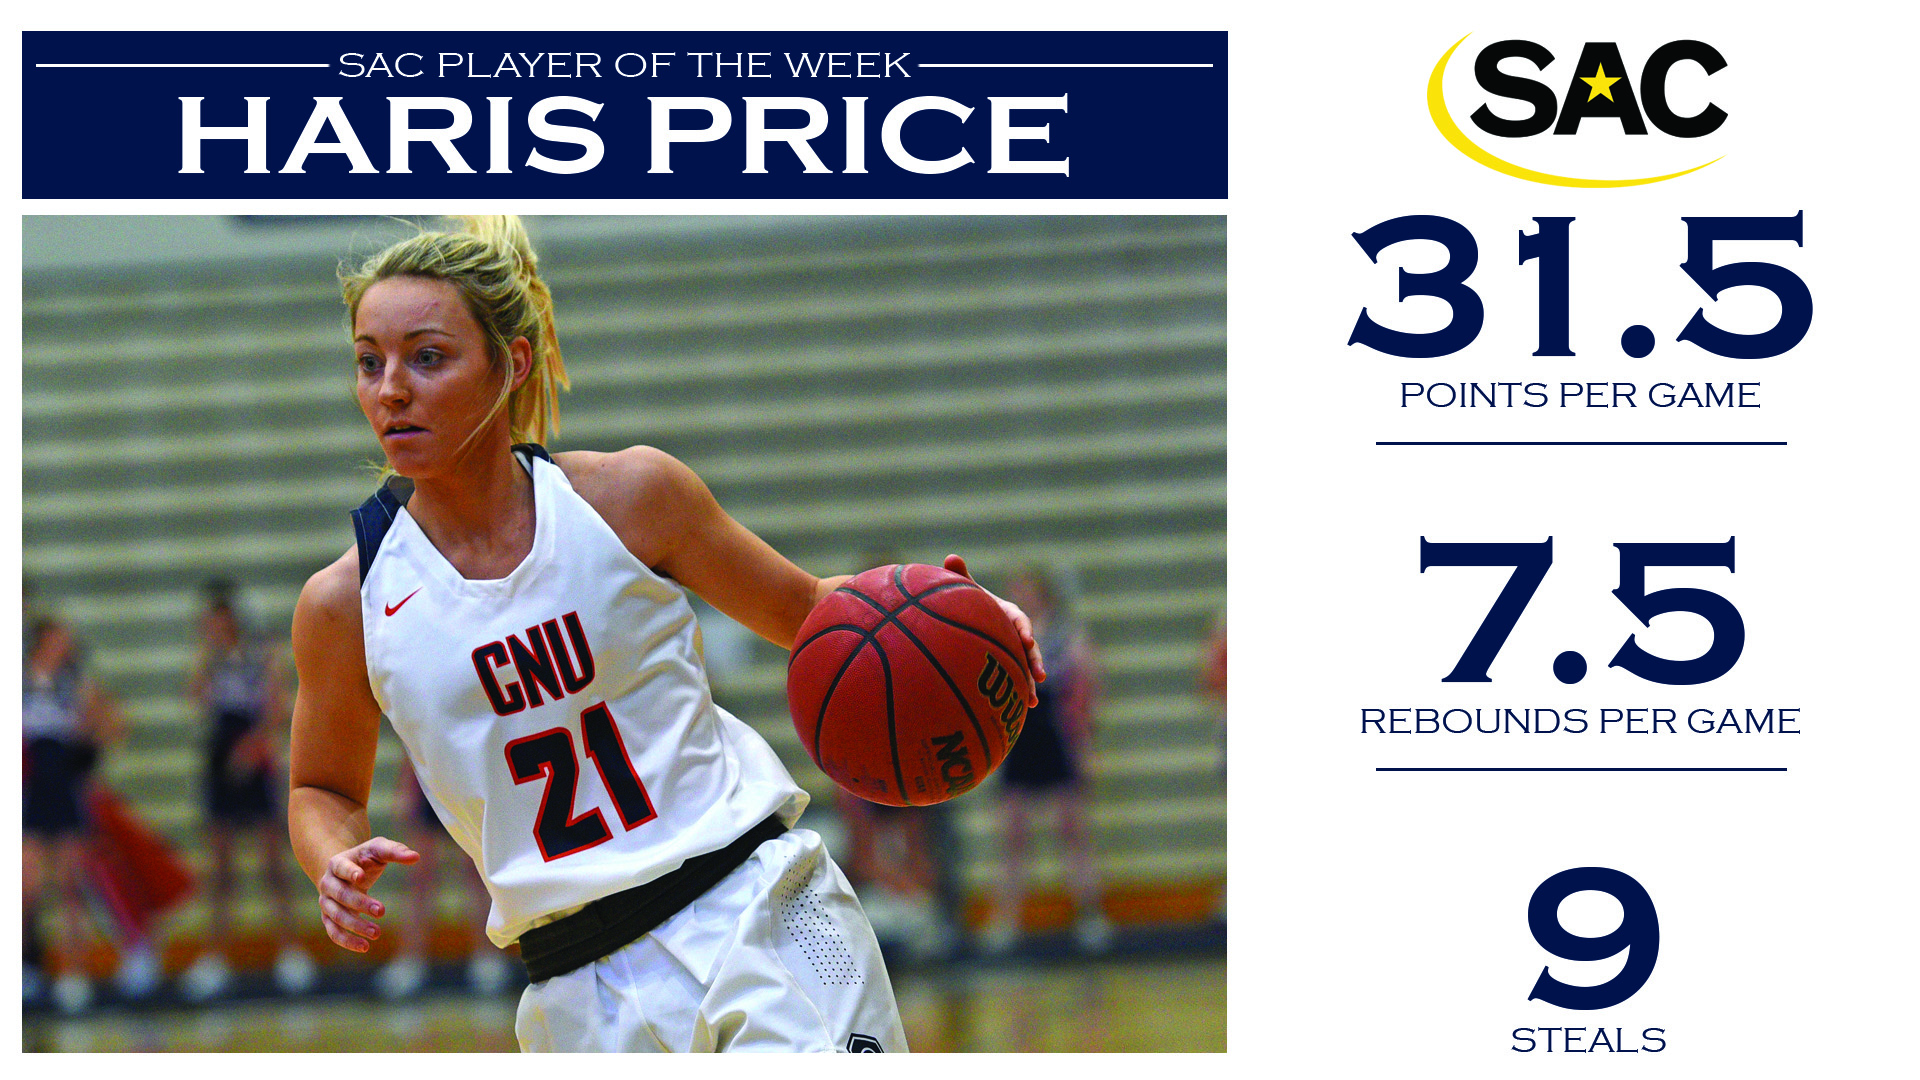 SAC lauds Price with Player of the Week honors